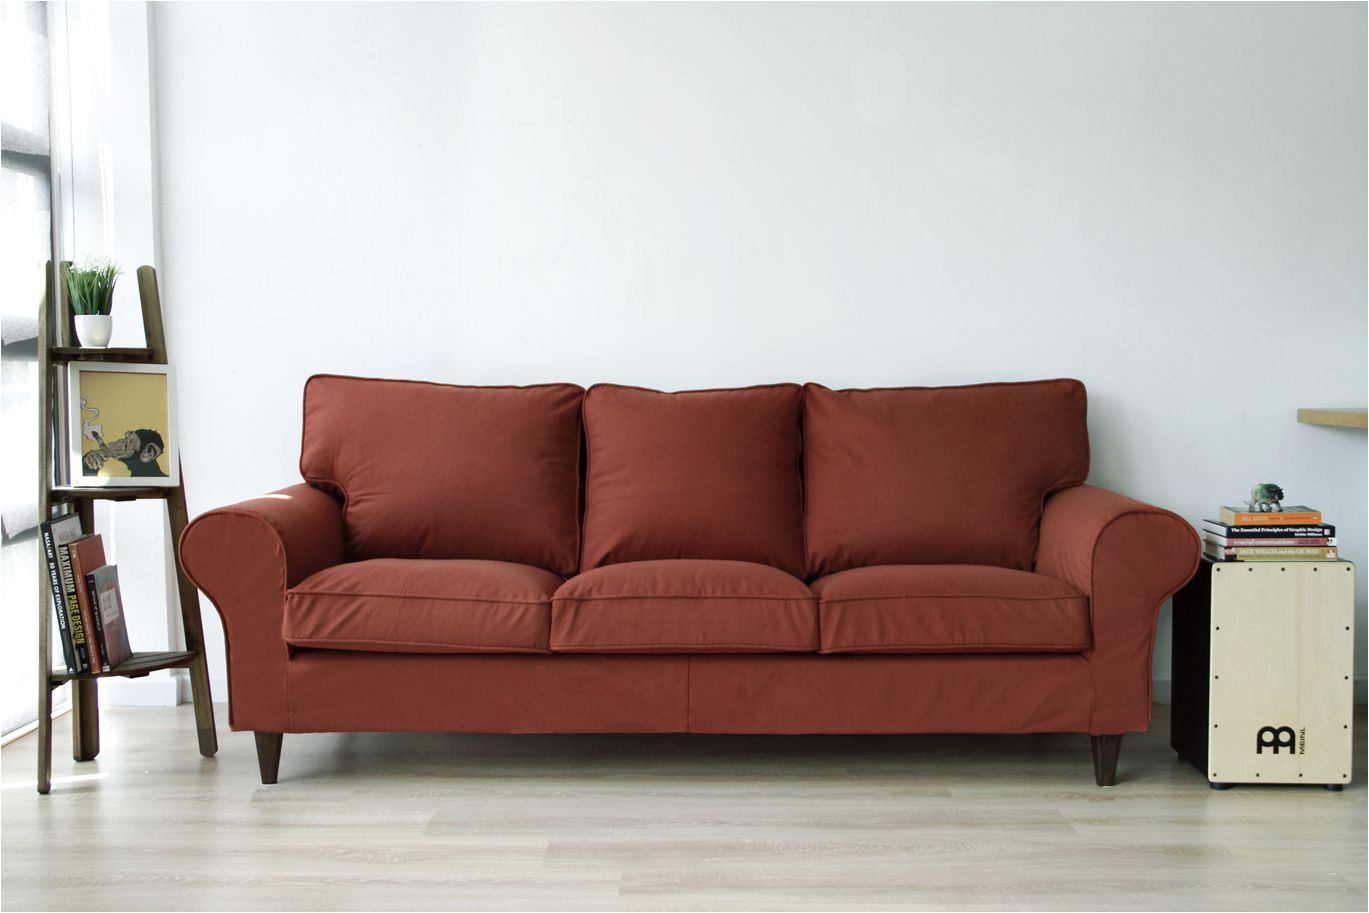 rust red woollen snug fit tailored sofa covers made by comfort works on an ikea ektorp 3 seater sofa with replacement custom stained walker wooden sofa